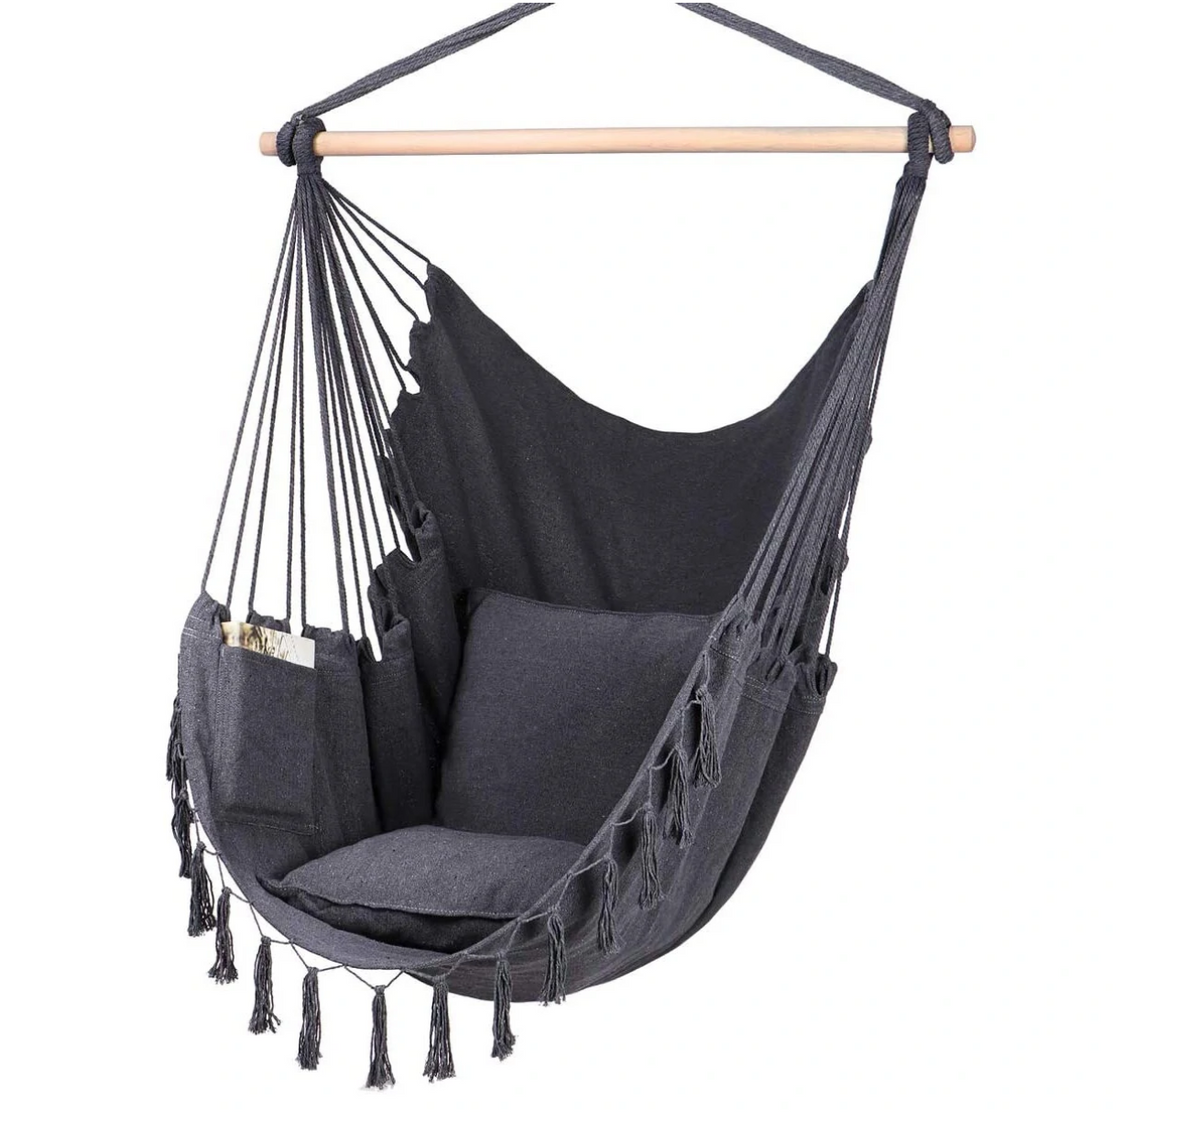 Large Tassel Hanging Chair with Pocket